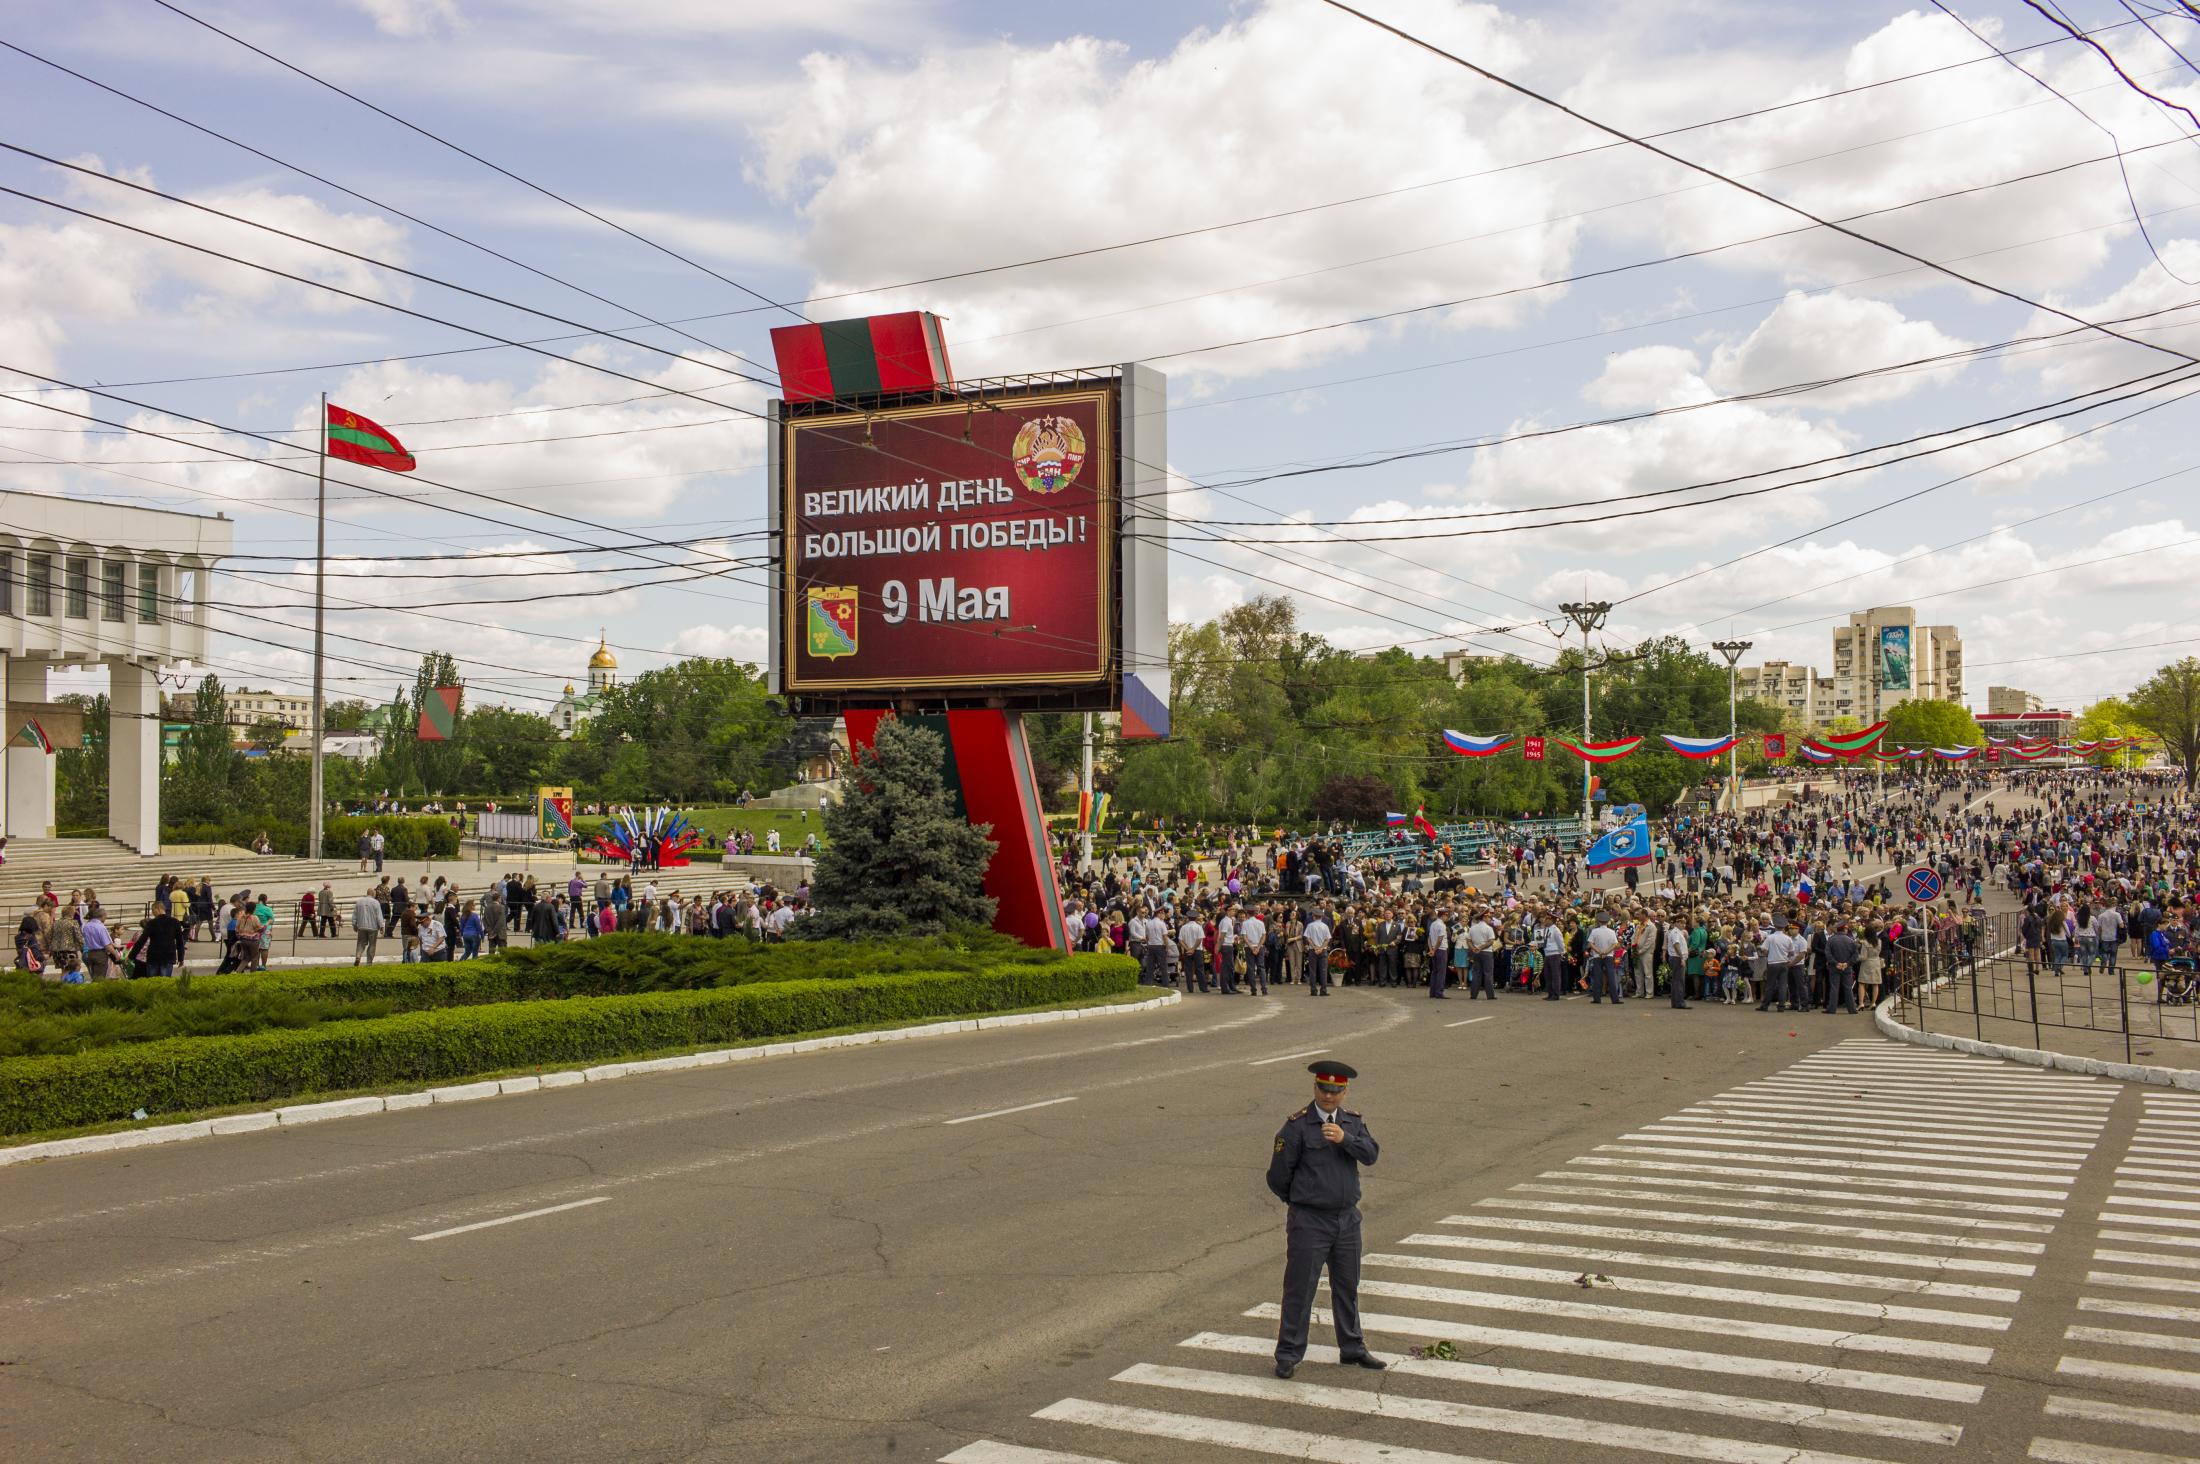 Victory Day in Transnistria -  A board reads "Great day of the great Victory"...